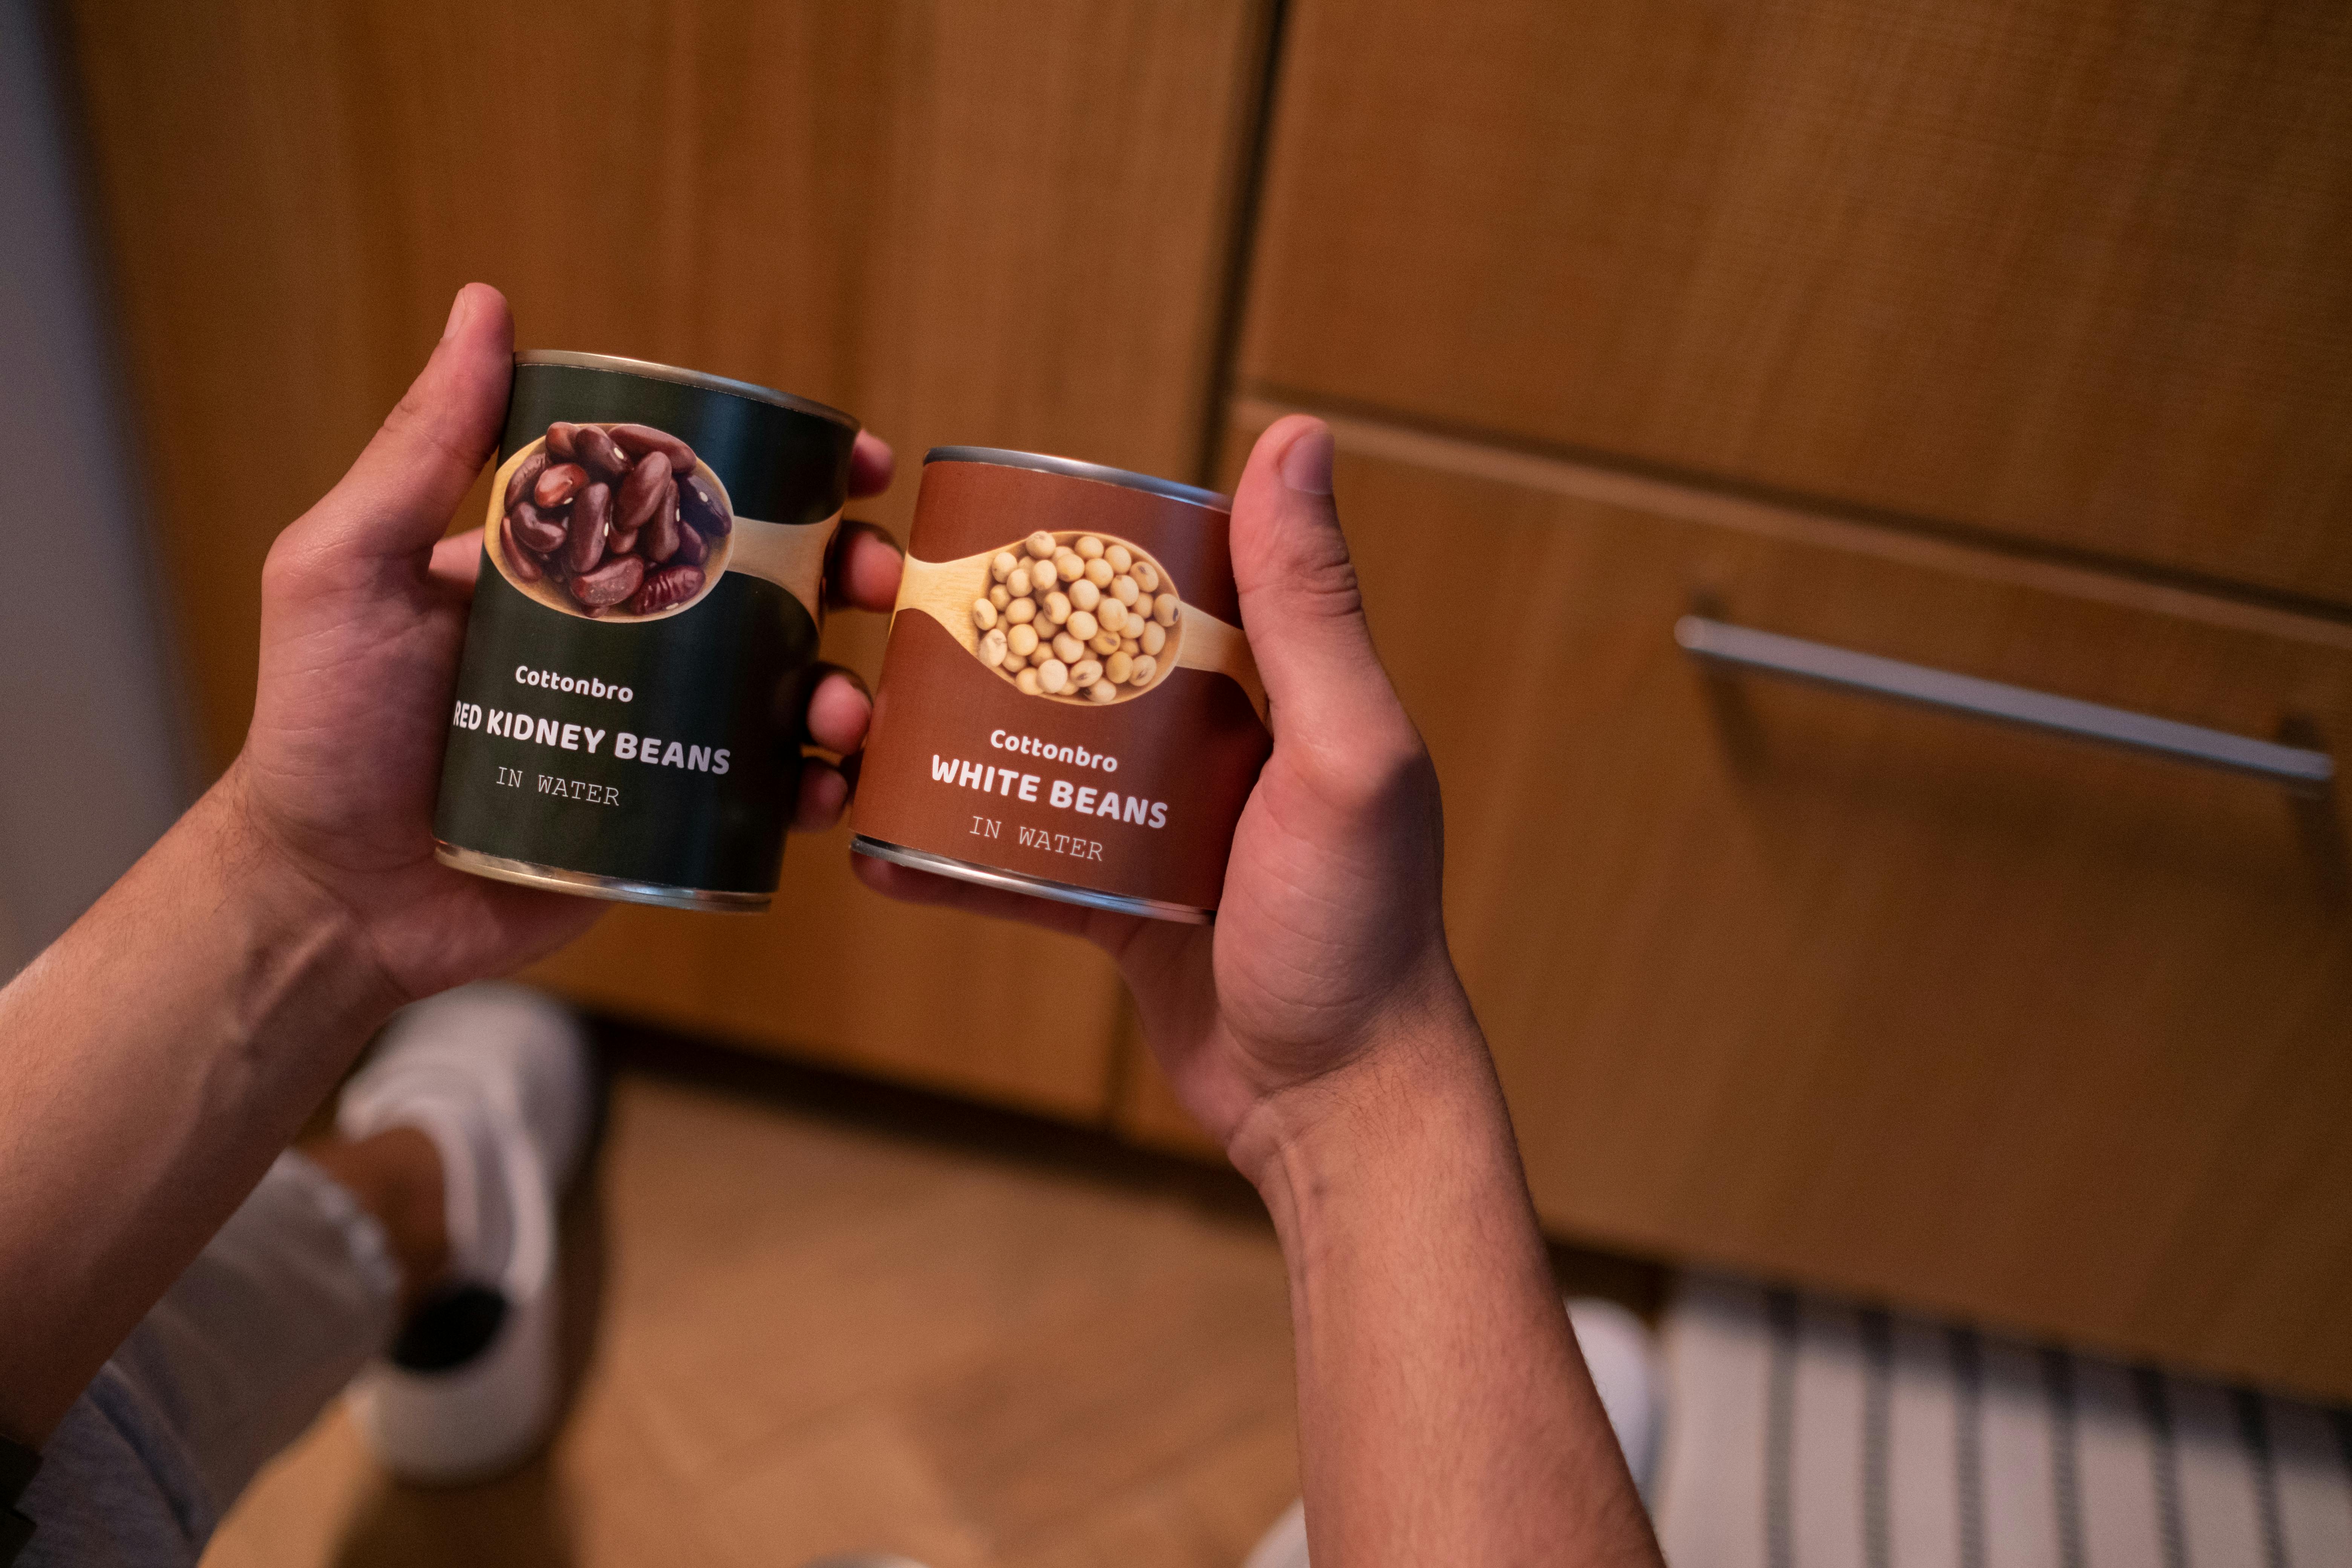 Hands holding cans of beans | Source: Pexels